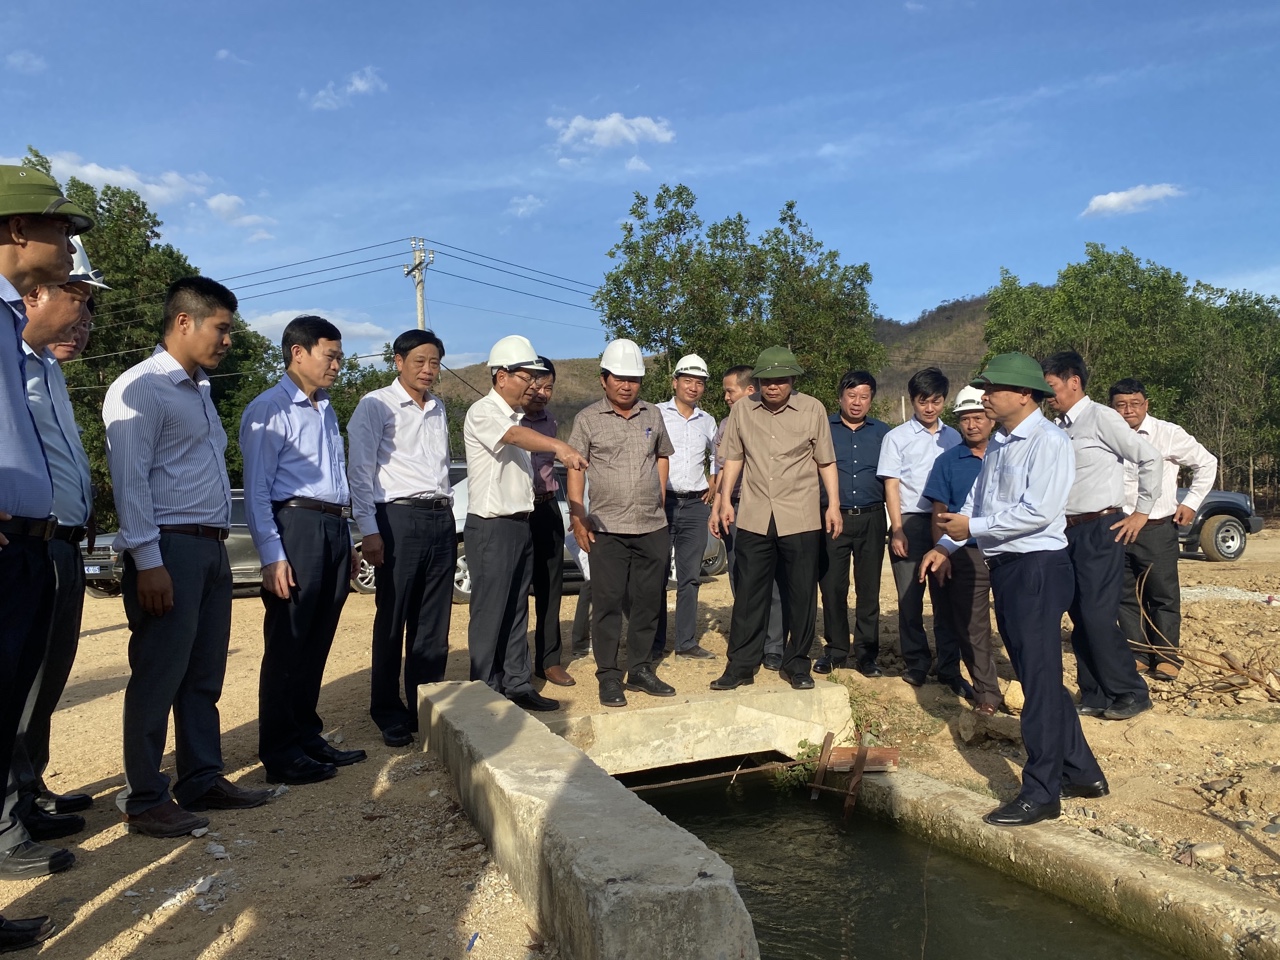 IWRP's leaders take part in a mission led by the Minister and Vice Minister of Agriculture and Rural Development to Ninh Thuan and Binh Thuan Provinces (May 23-25, 2020)